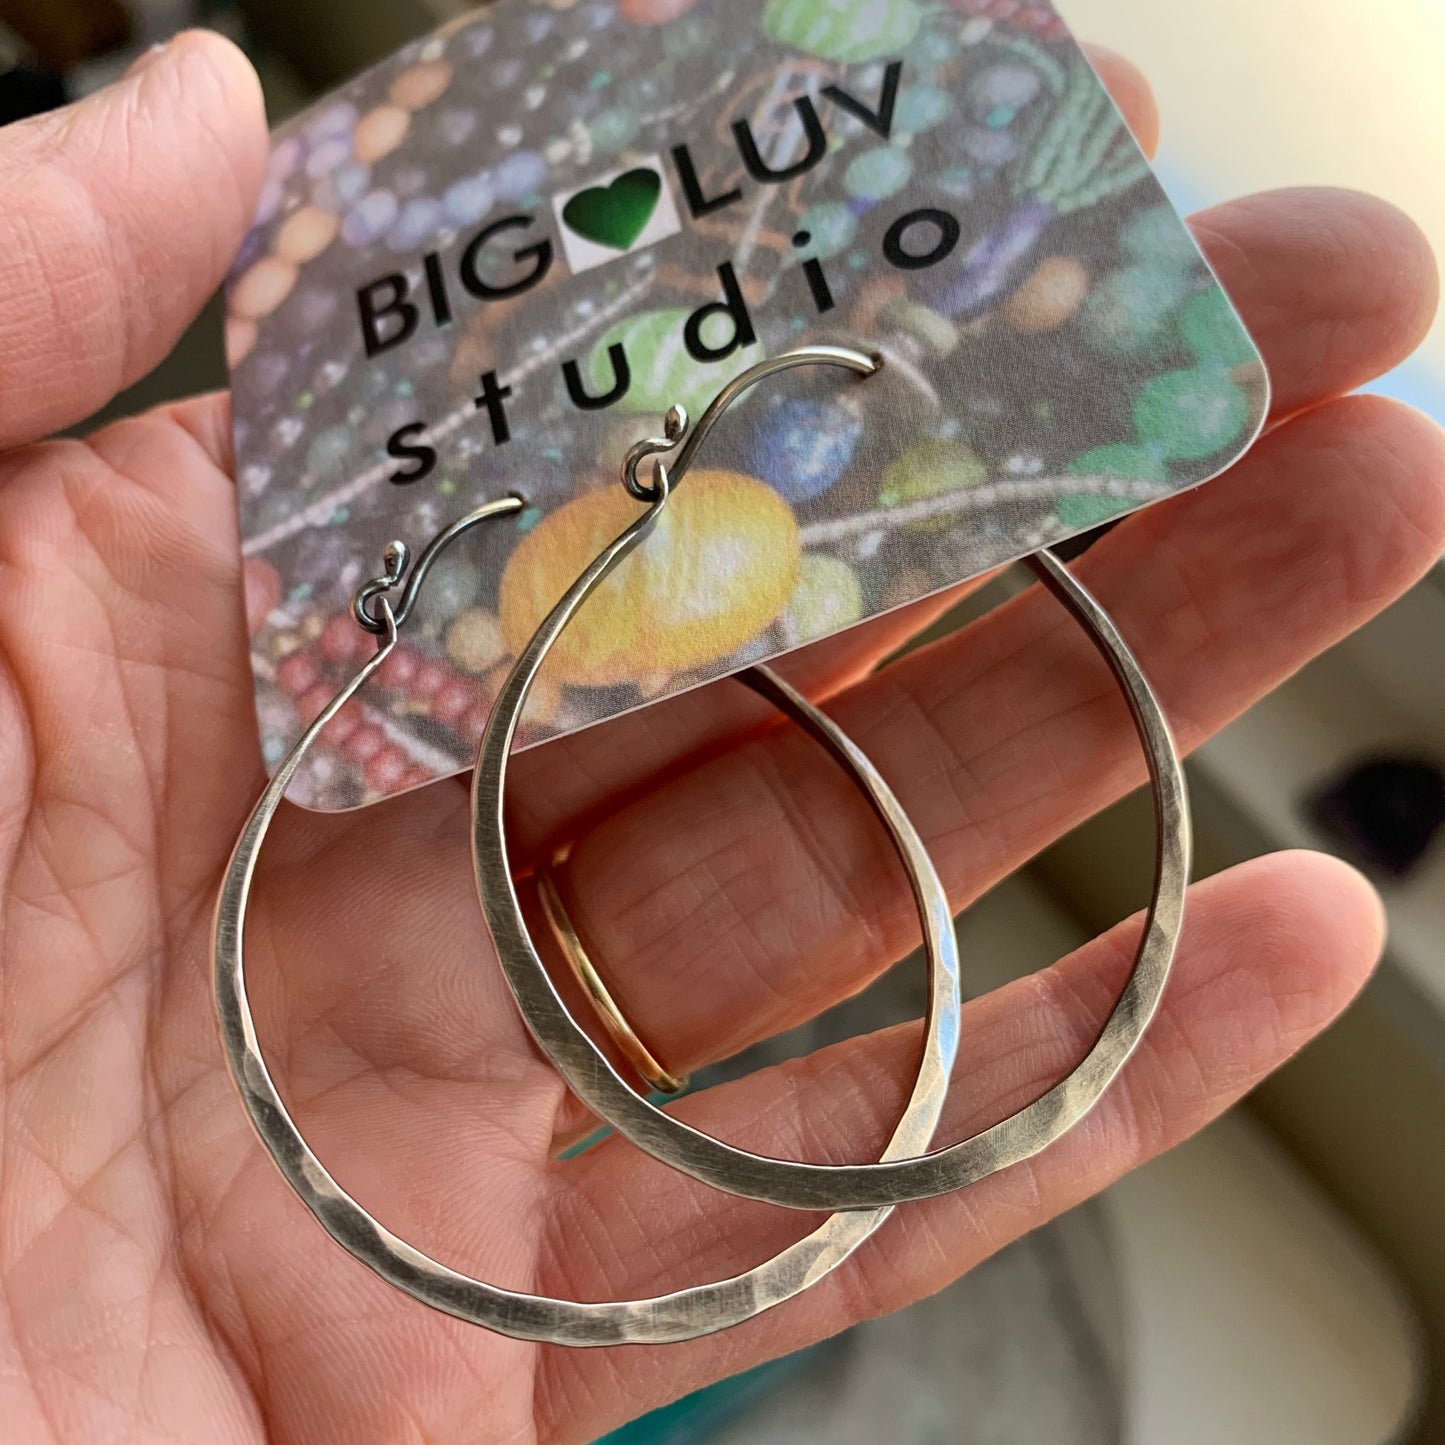 Silver hoops - sterling silver round hoop earrings - handmade jewelry - forged metal - boho style - one of a kind jewelry for women - gifts